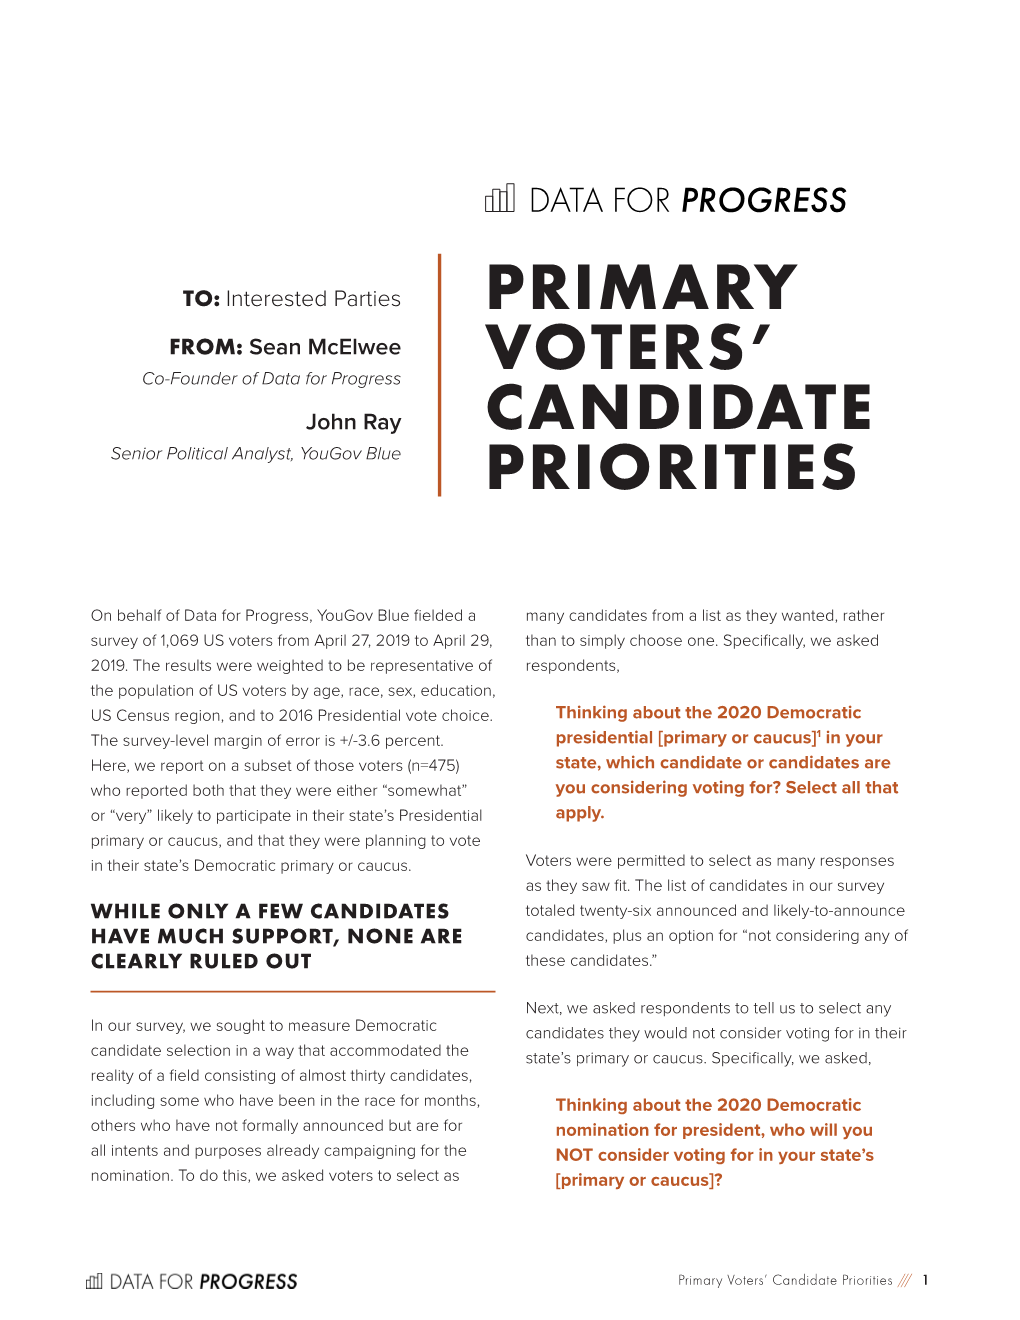 Primary Voters' Candidate Priorities